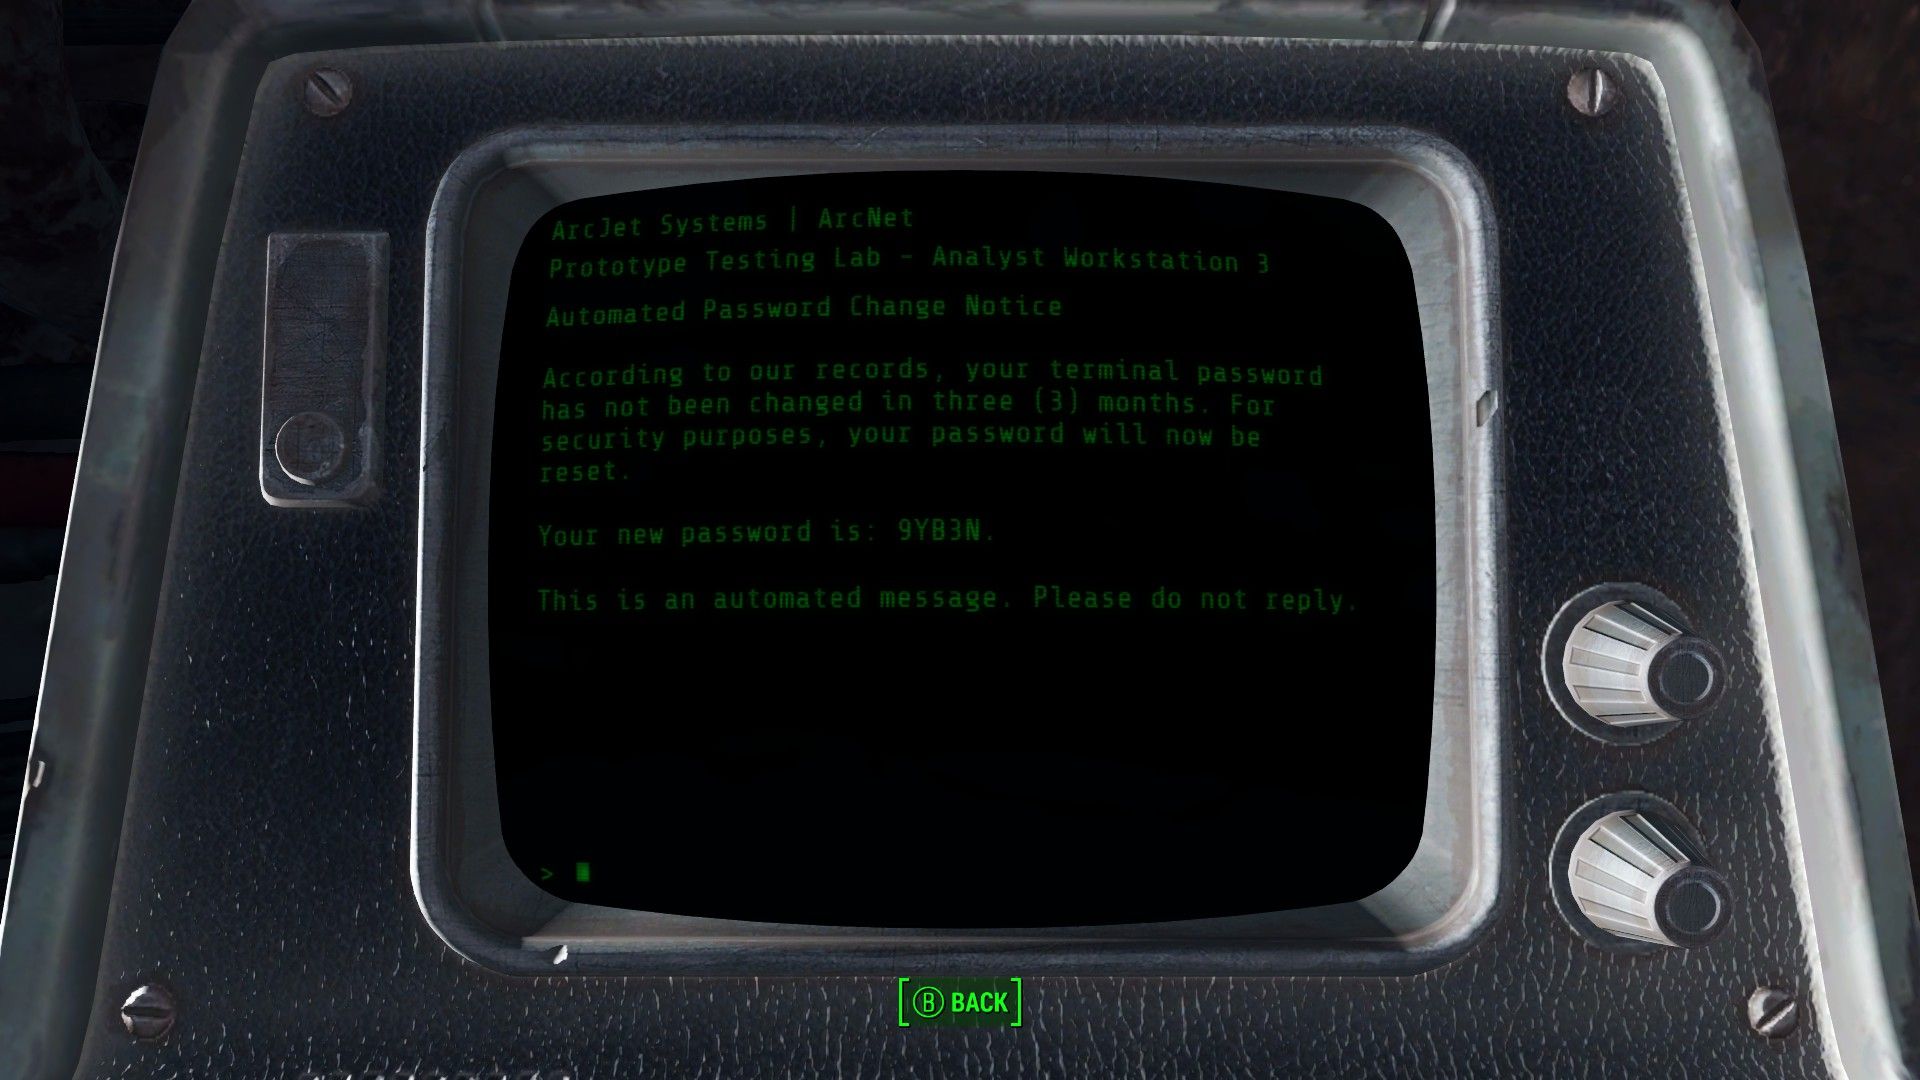 Hacking terminals in fallout 4 фото 10